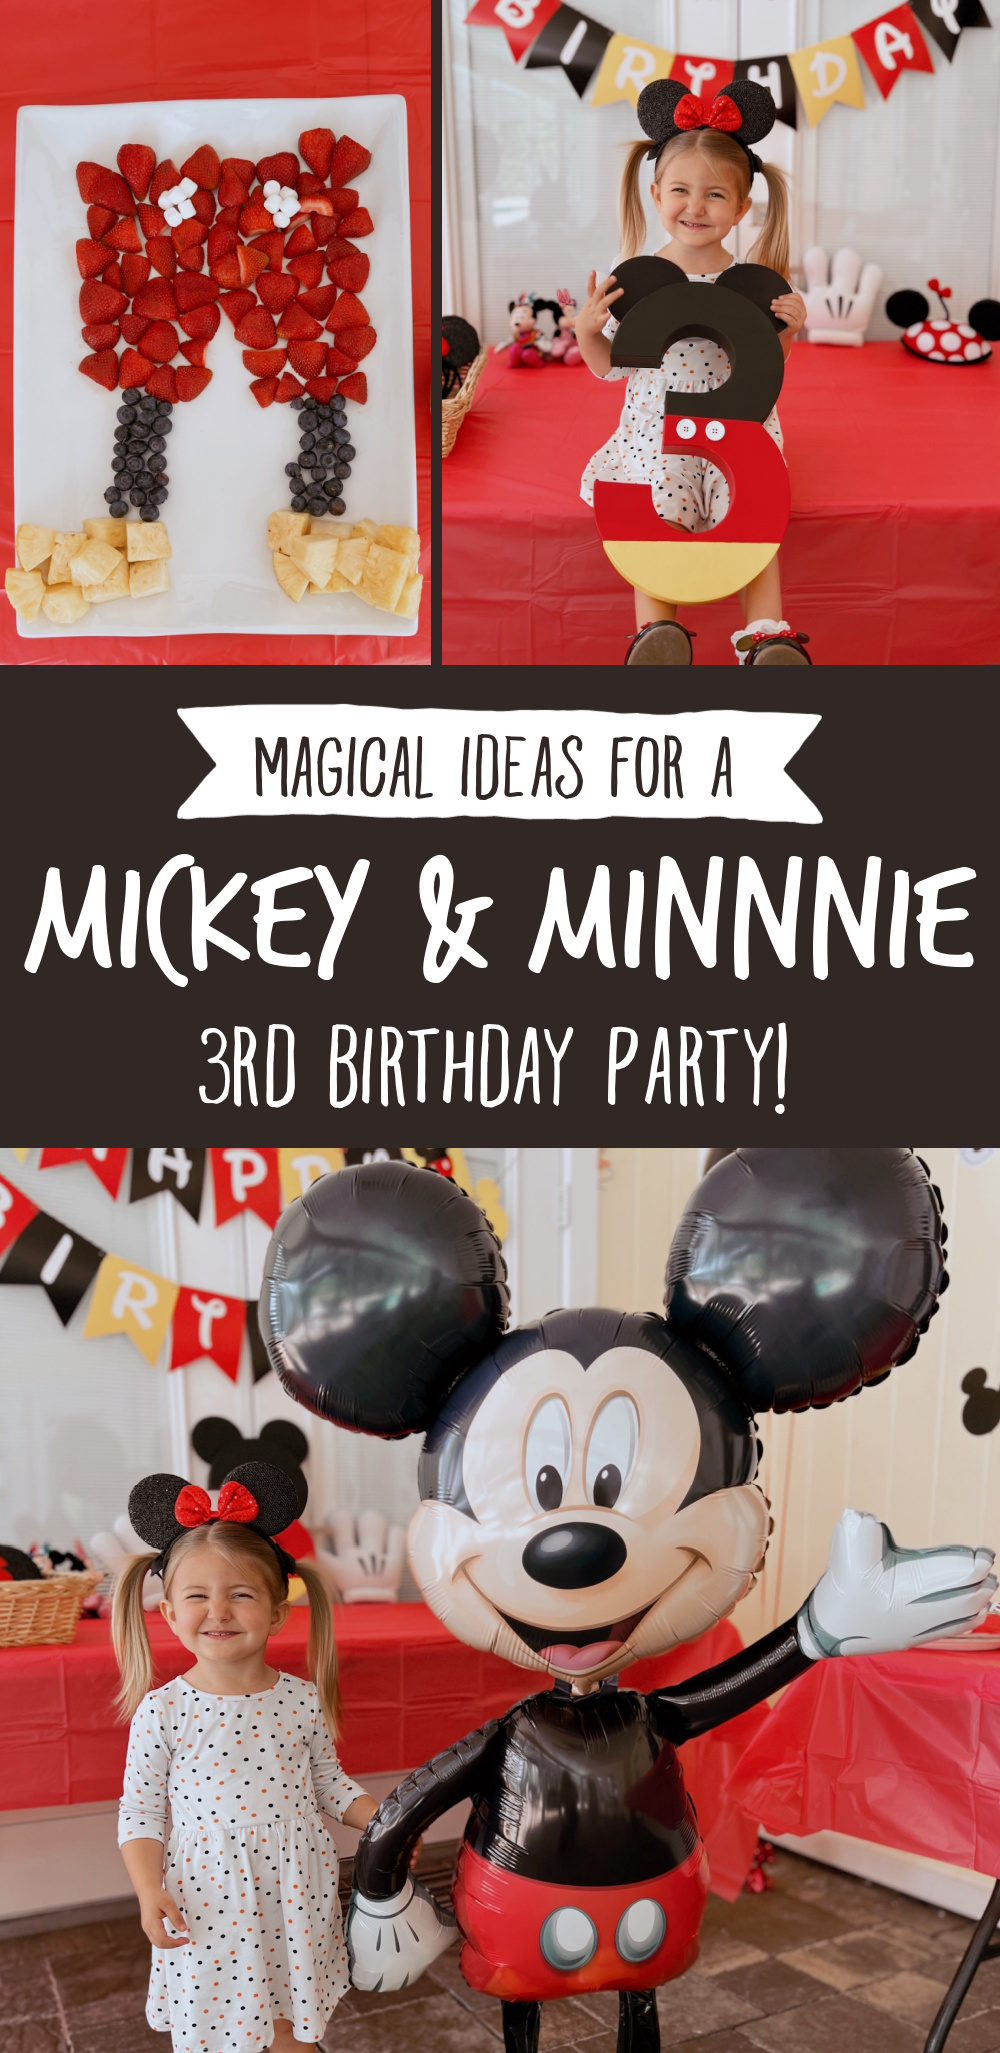 Mickey mouse party ideas